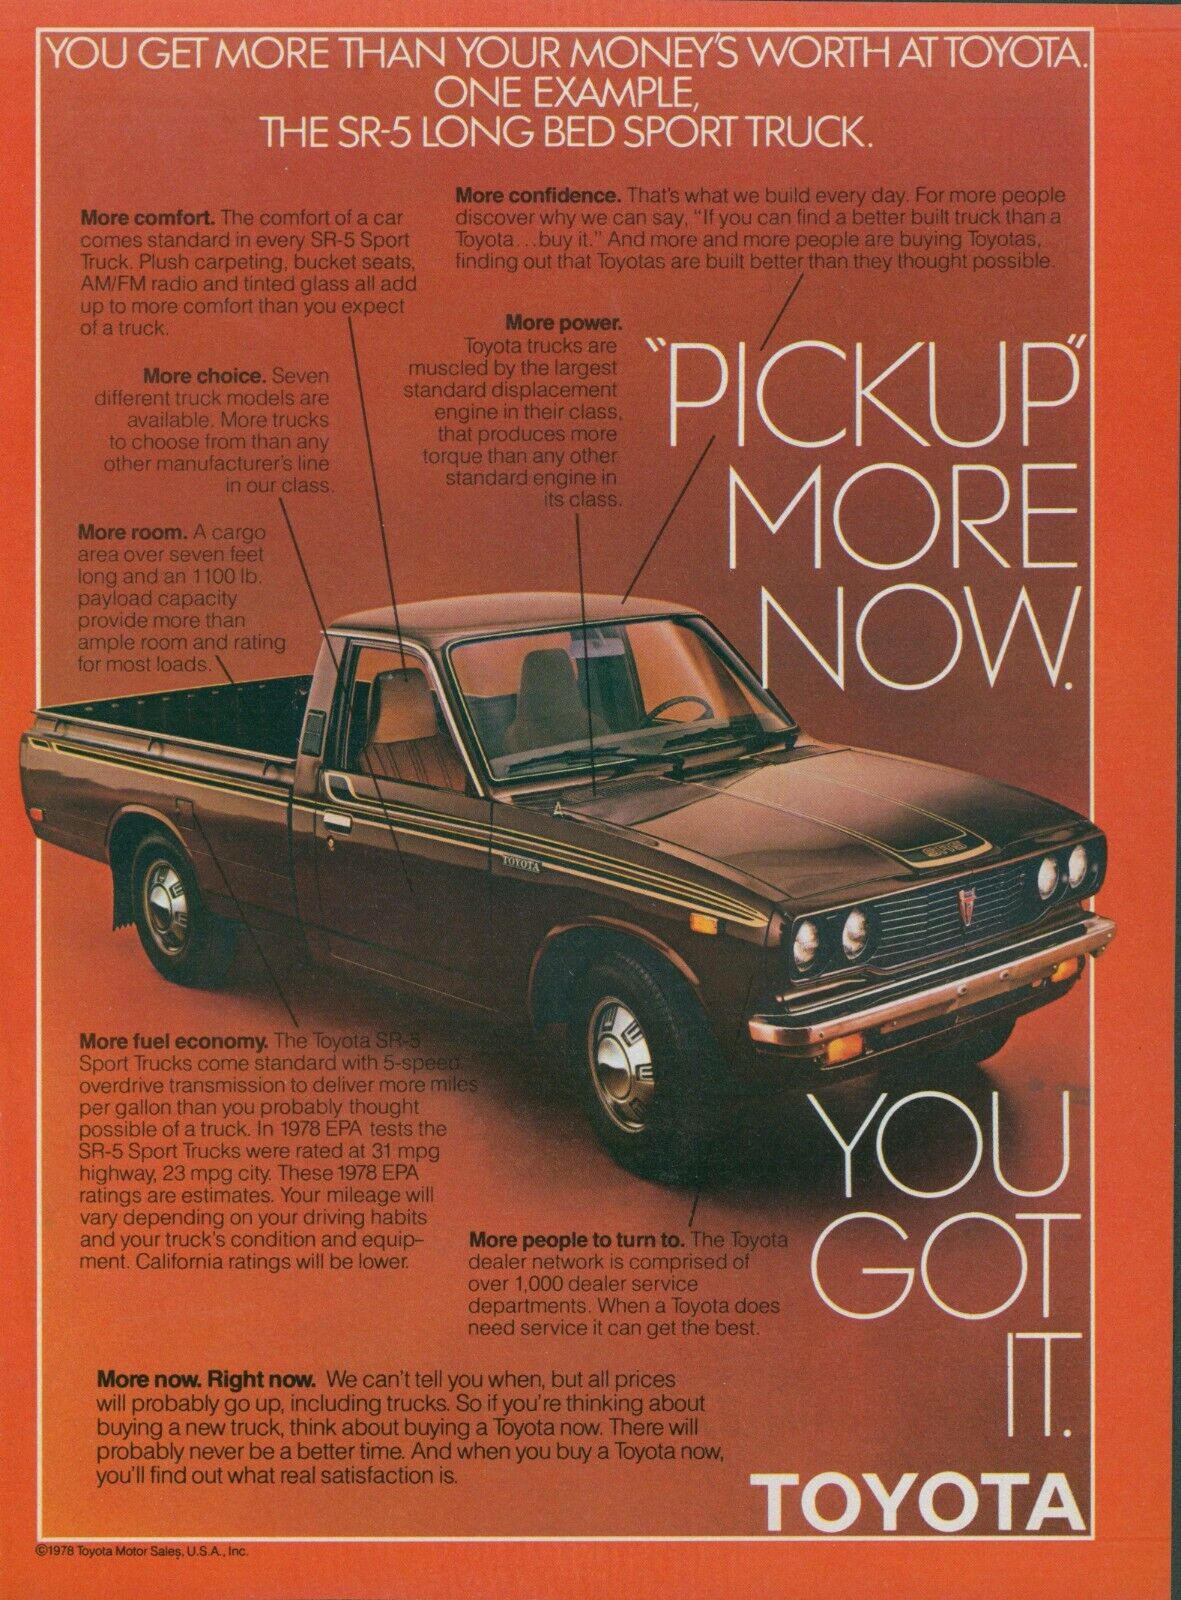 1978 Toyota SR5 Long Bed Sport Truck Pickup More Right Now Vintage Print Ad SI2